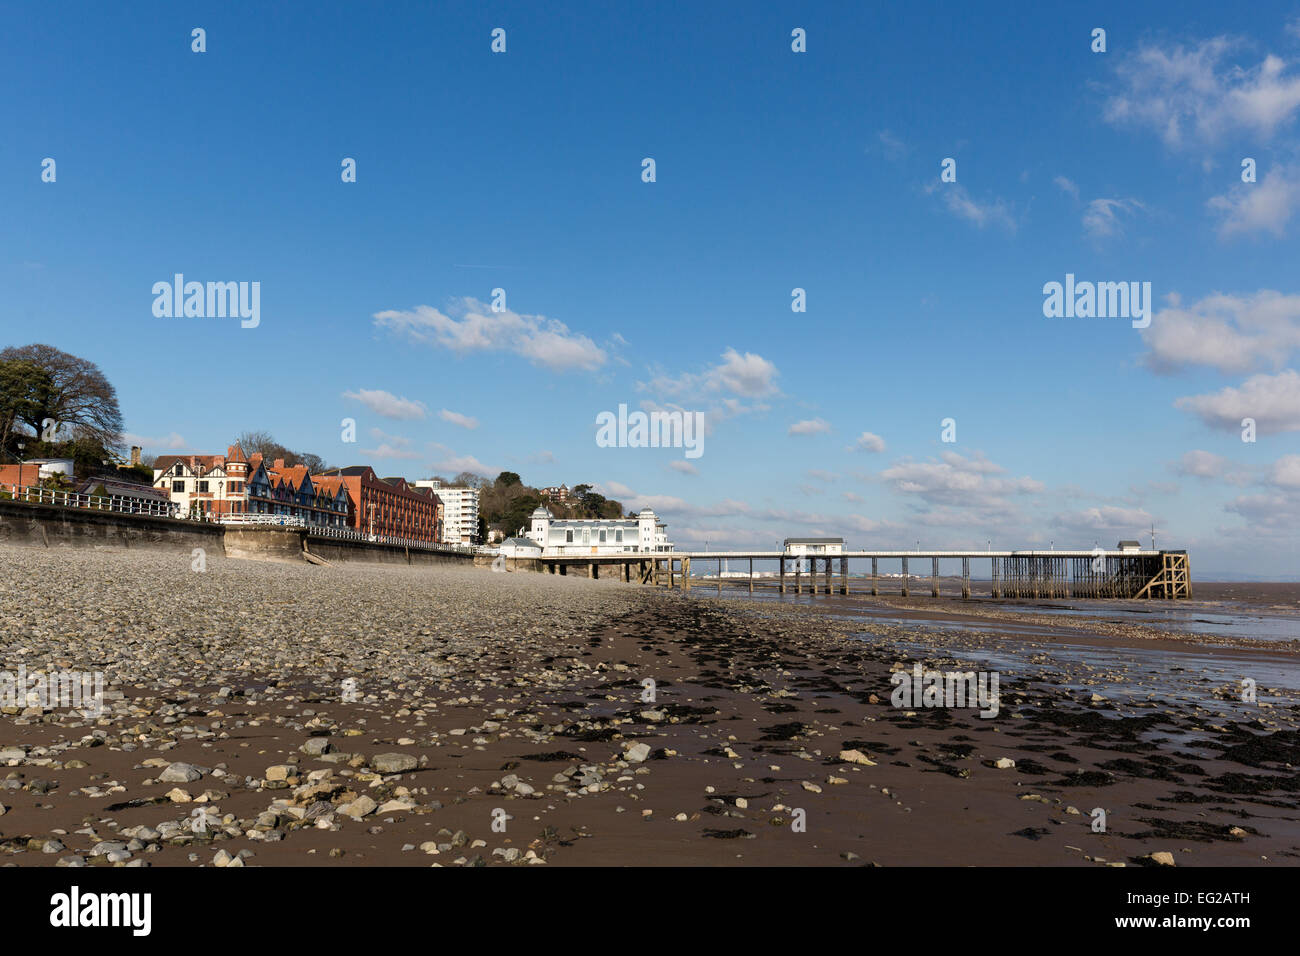 The Victorian pier at Penarth, Wales, UK Stock Photo